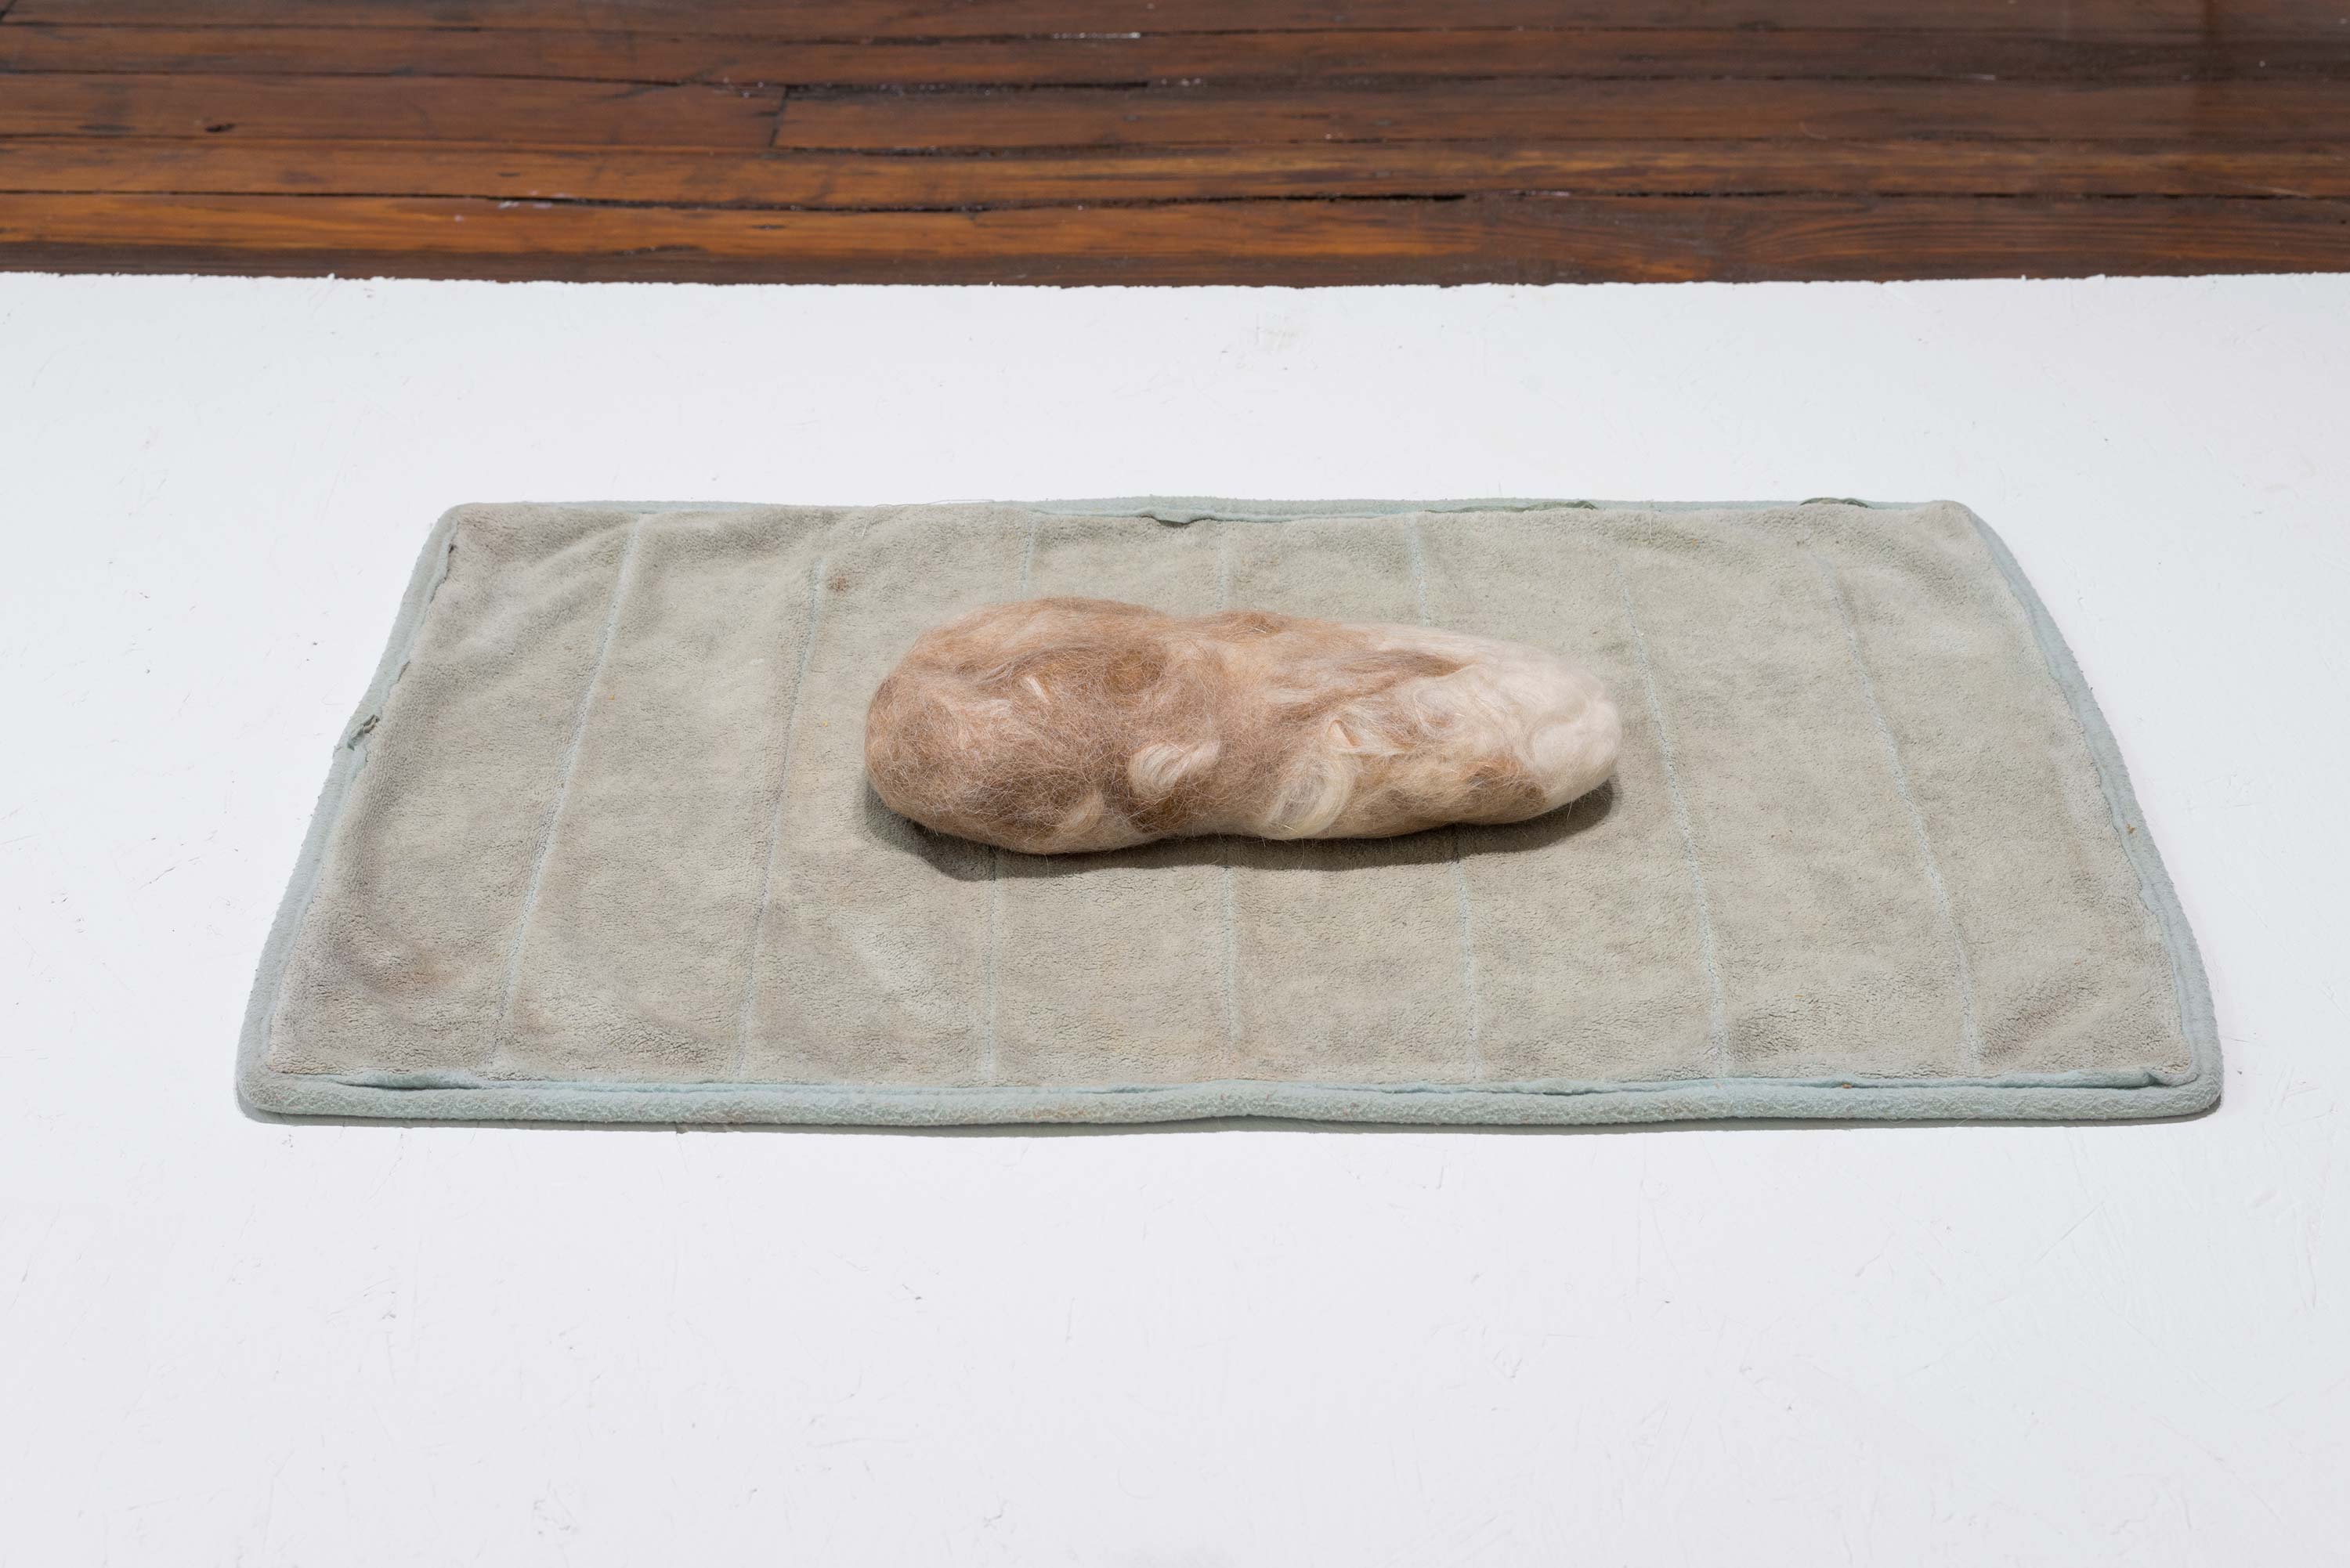 Kylie Lockwood<br>Untitled<br>2015<br>Dog hair and rug<br>2.5 x 24 x 16.75 inches (6.4 x 61 x 42.5 cm)